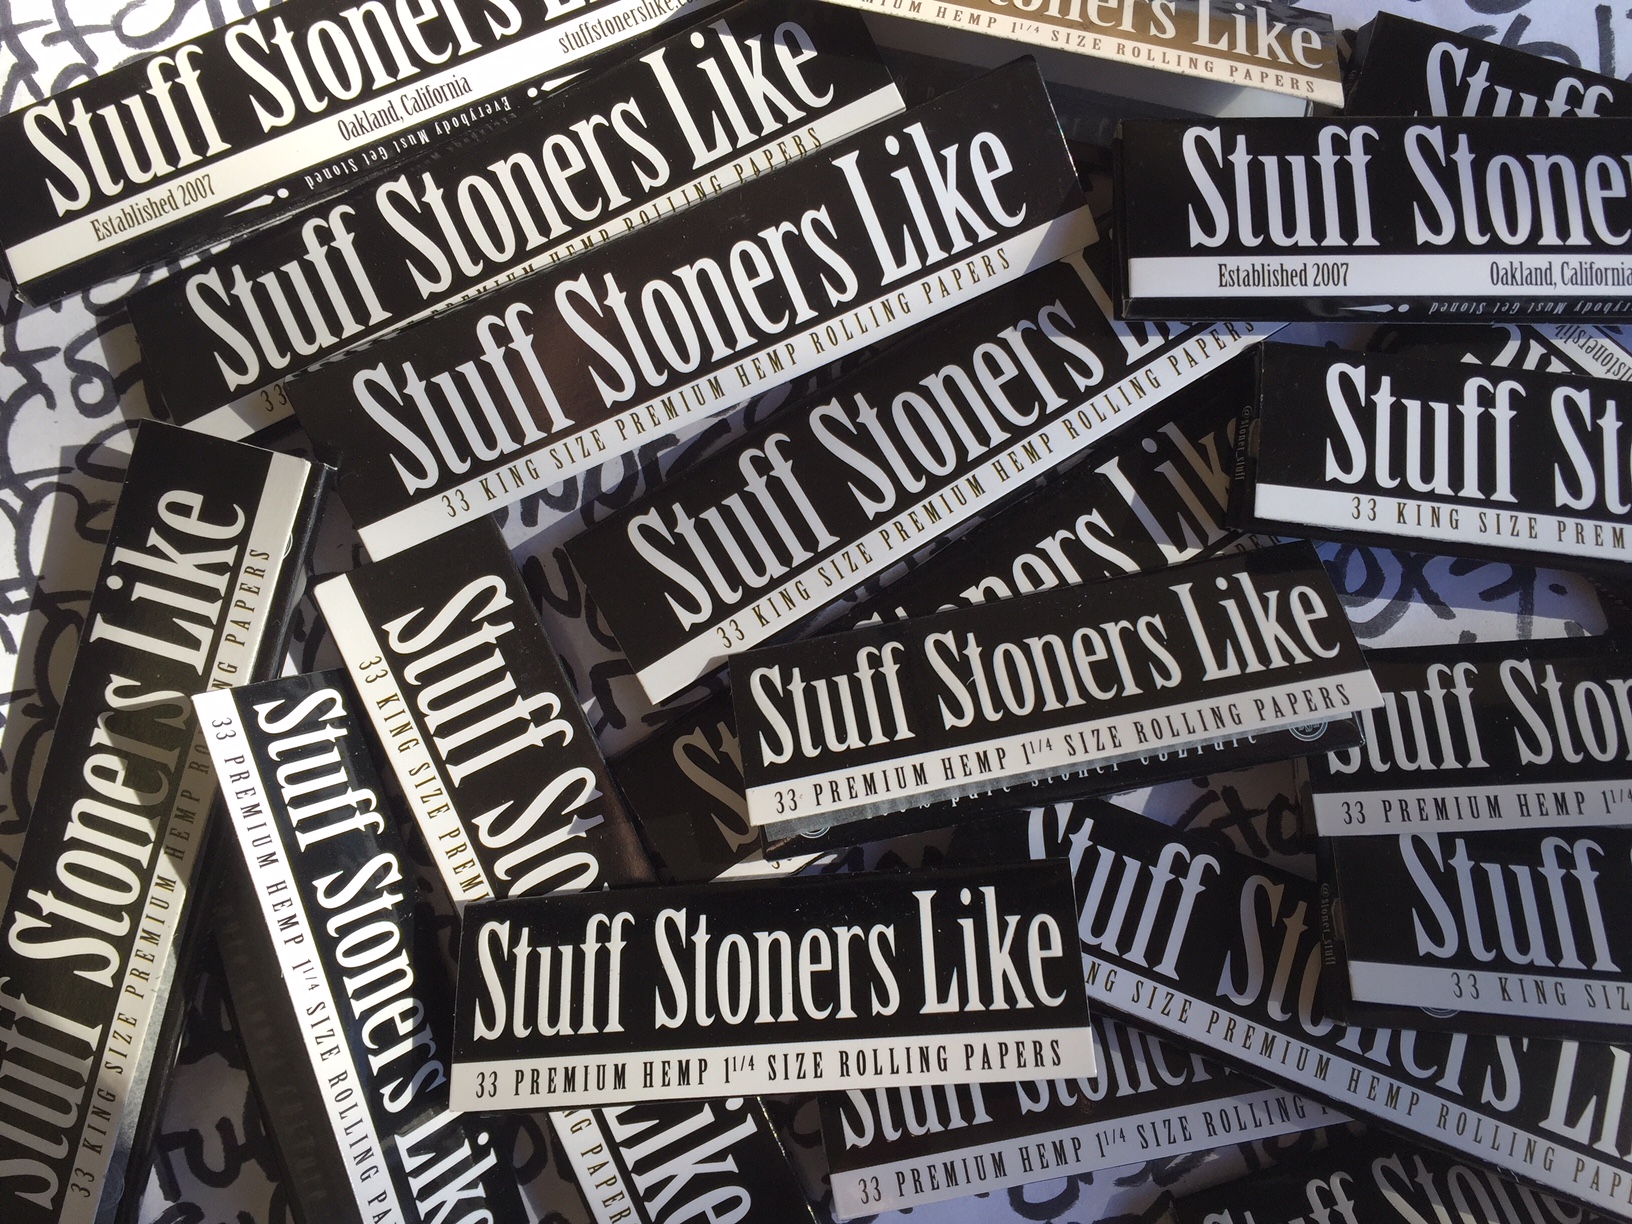 Stuff Stoners Like Rolling papers